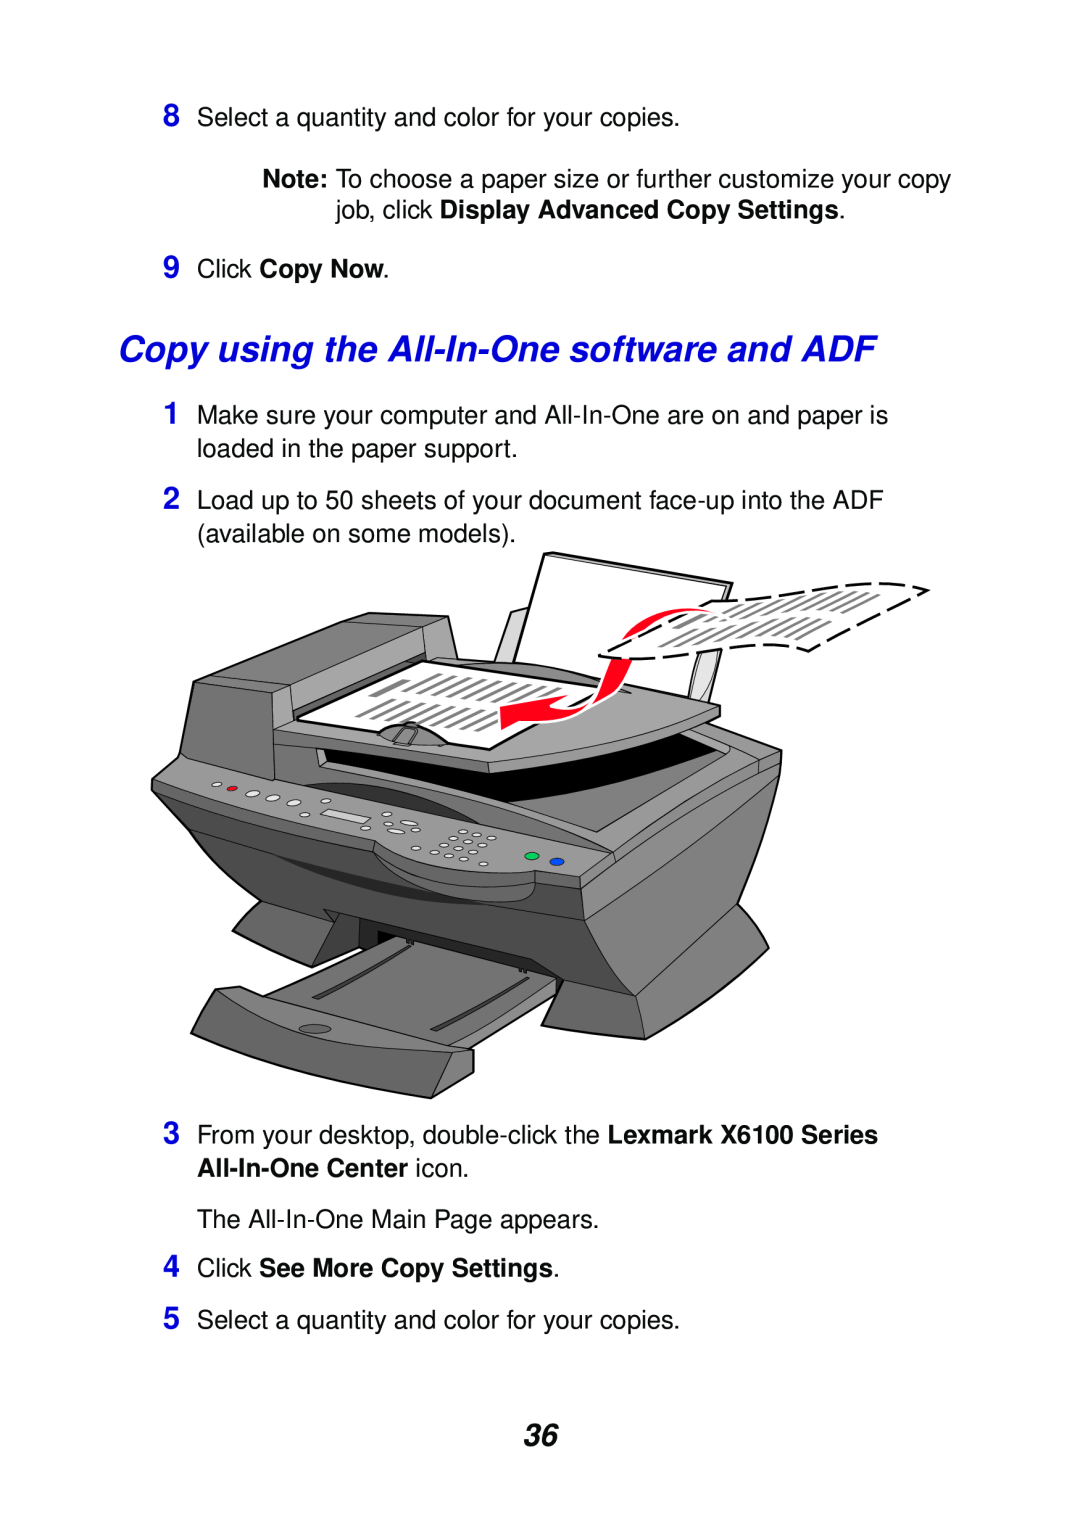 Lexmark X6100 manual Copy using the All-In-Onesoftware and ADF, 9Click Copy Now, 4Click See More Copy Settings 